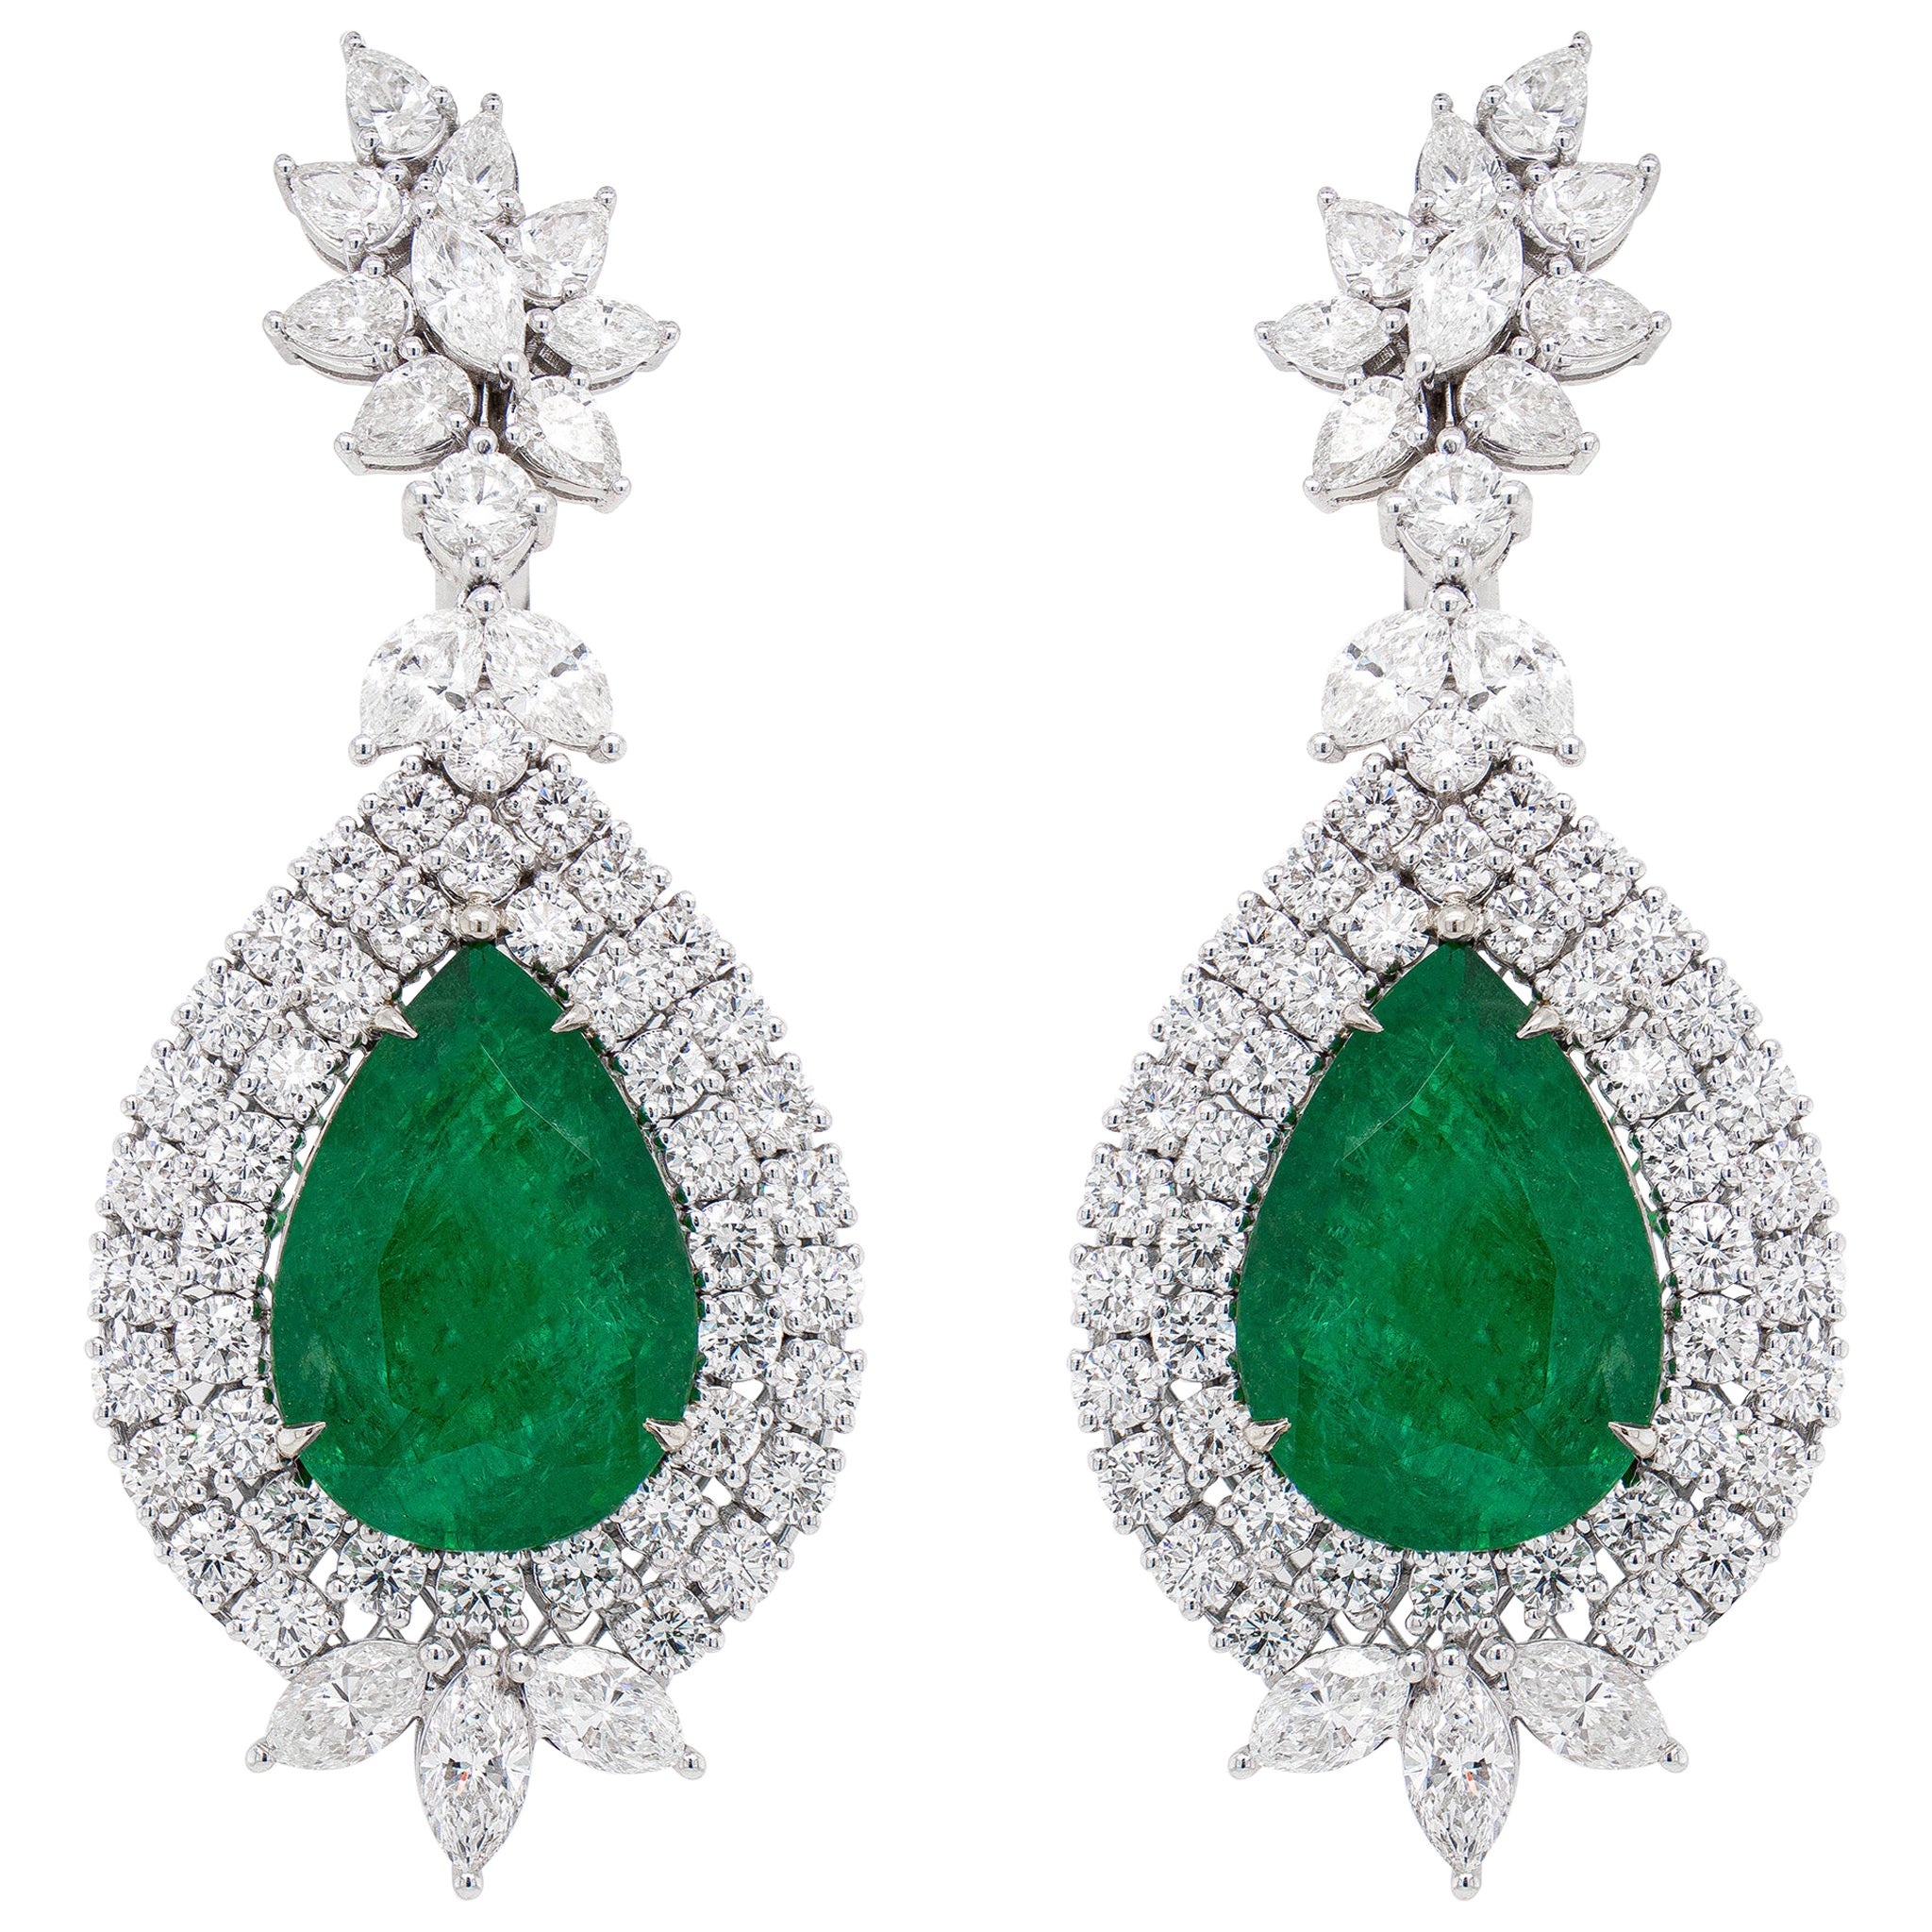 Important 21.86 Carat Pear Emerald Earrings Set with Diamonds 10.52 Carats Total For Sale